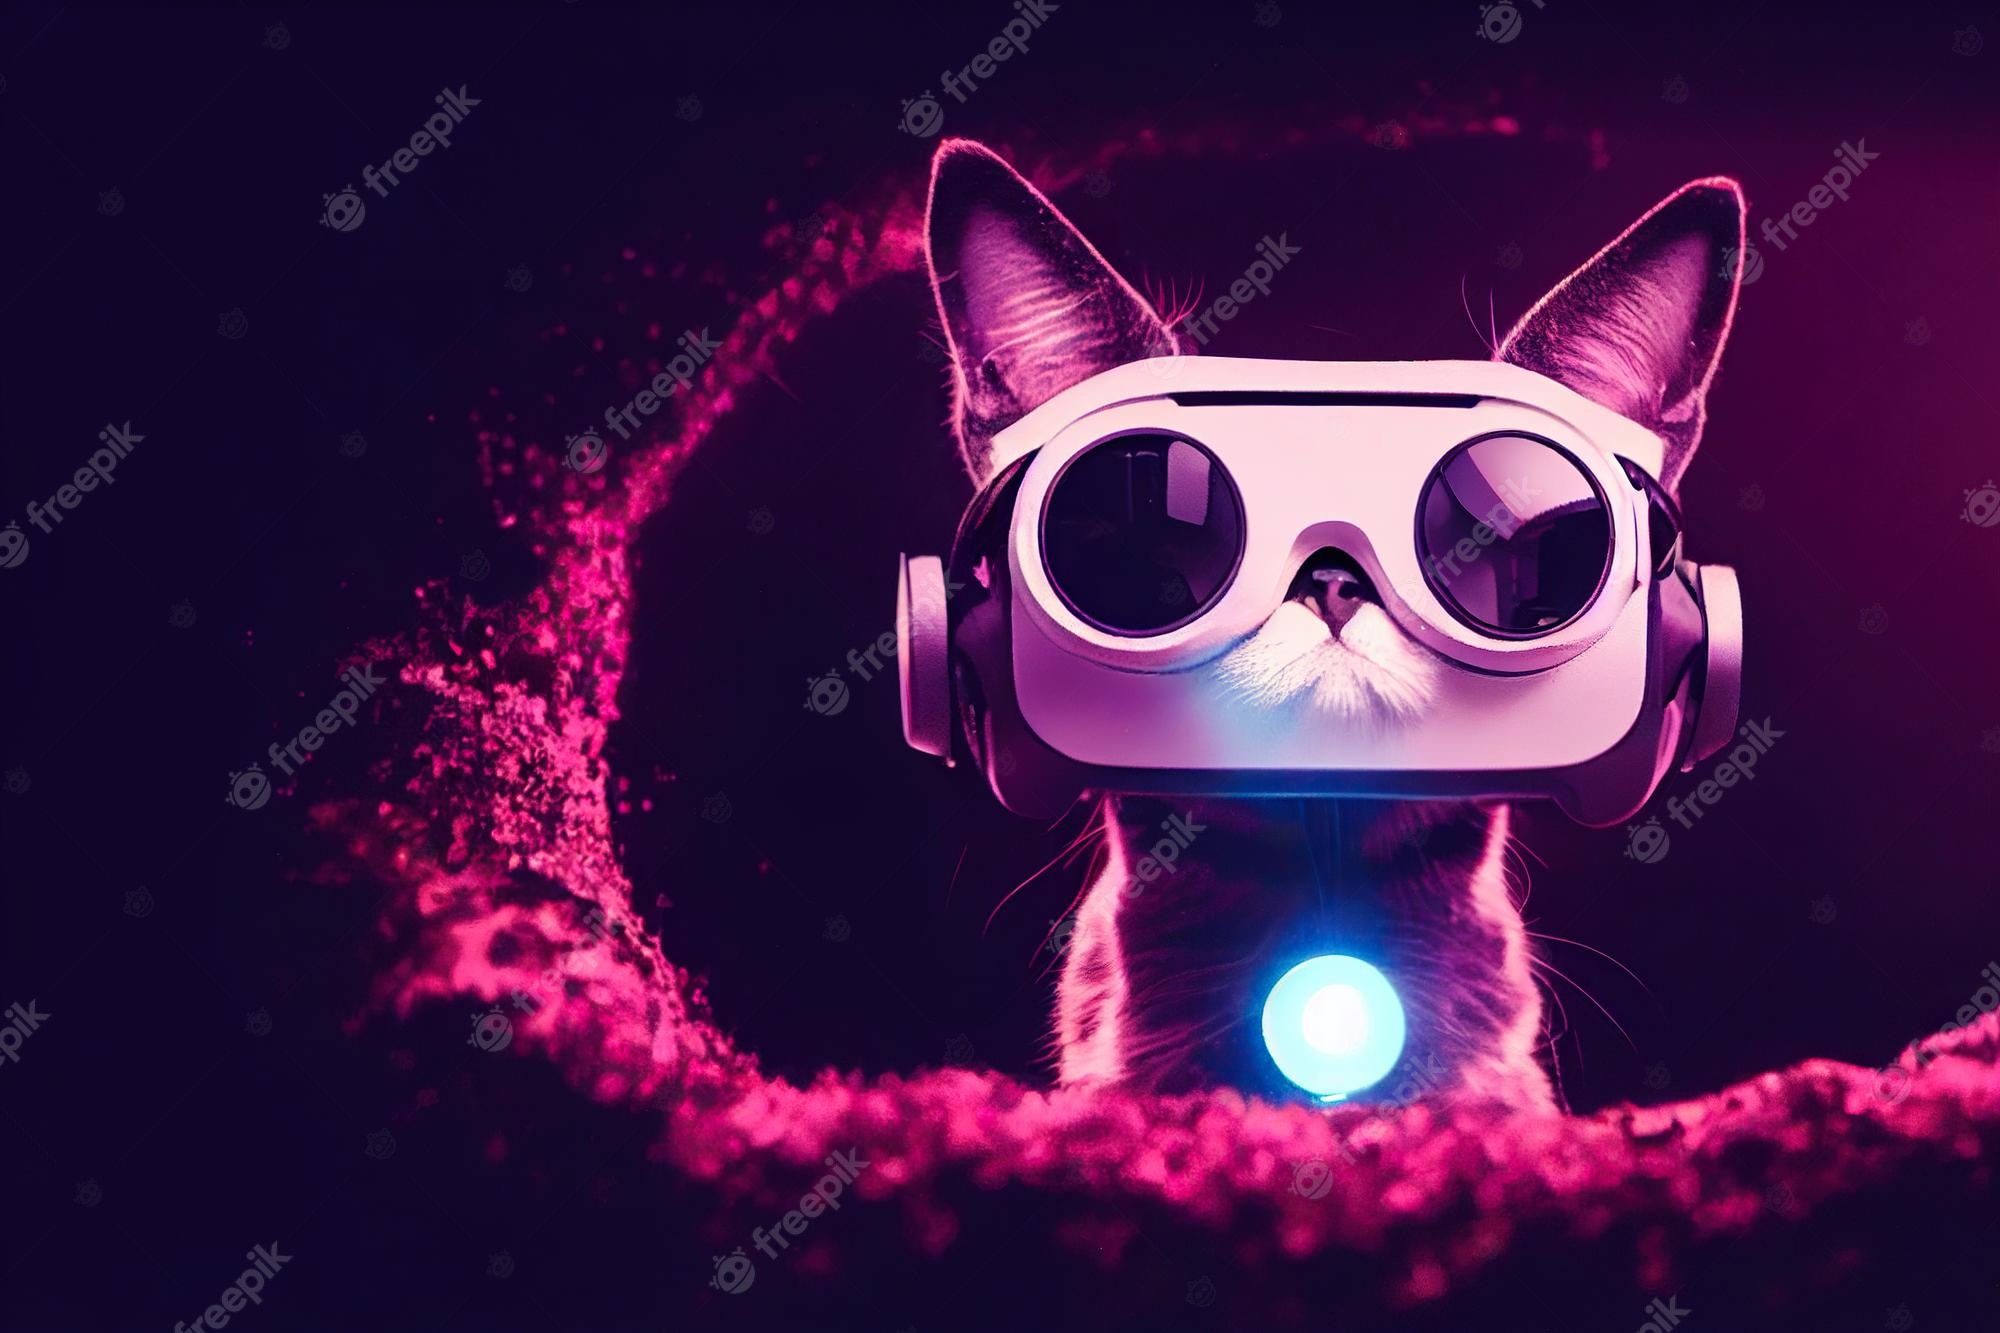 Page cat pink background images free vectors stock photos psd